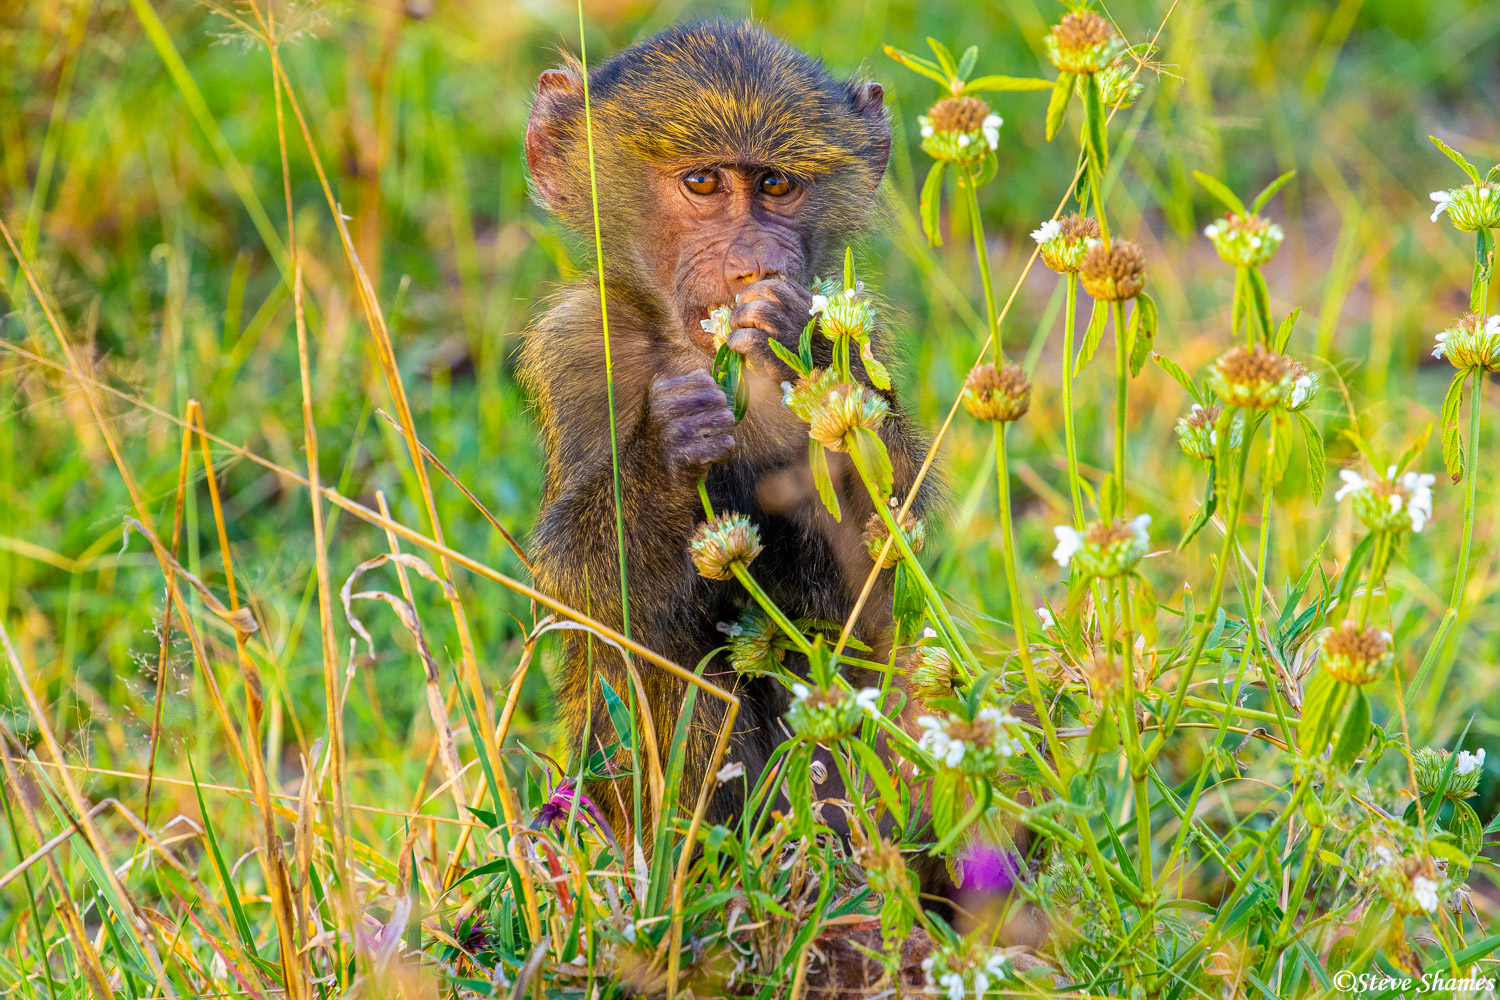 Baboon baby sniffing around among the flowers.